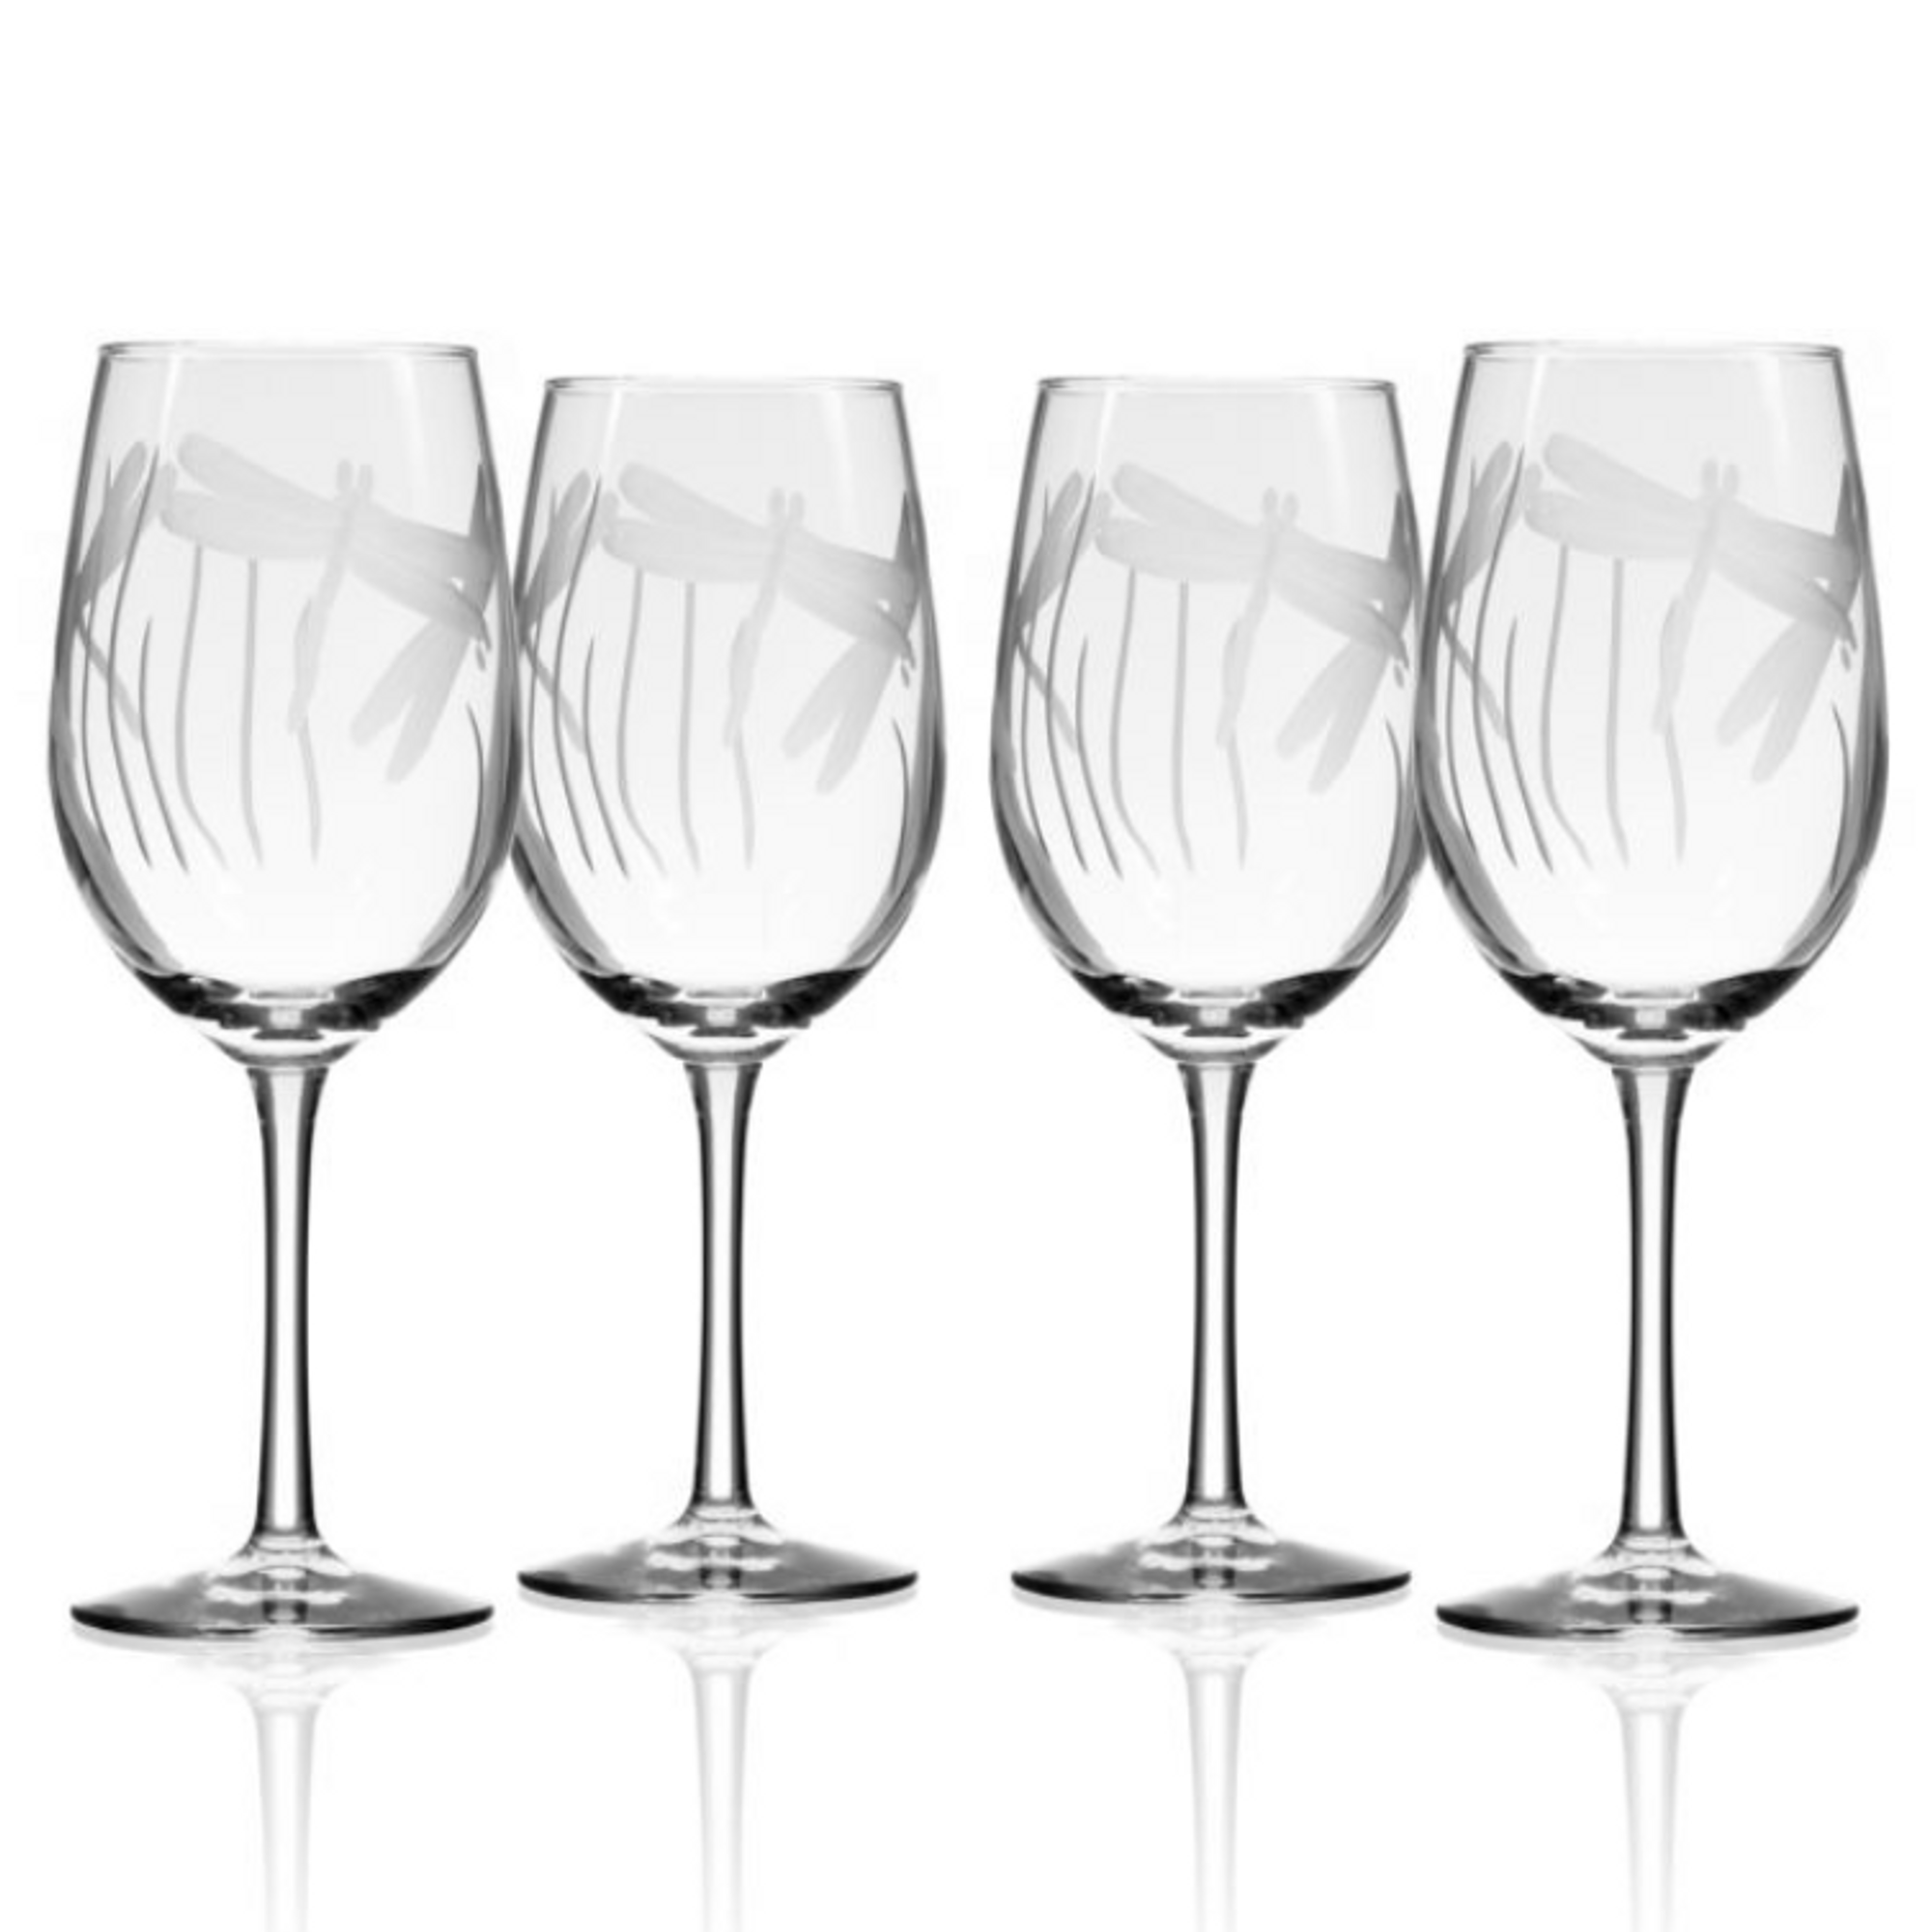 Etched White Wine Glasses Best Friends - Design: BEST - Everything